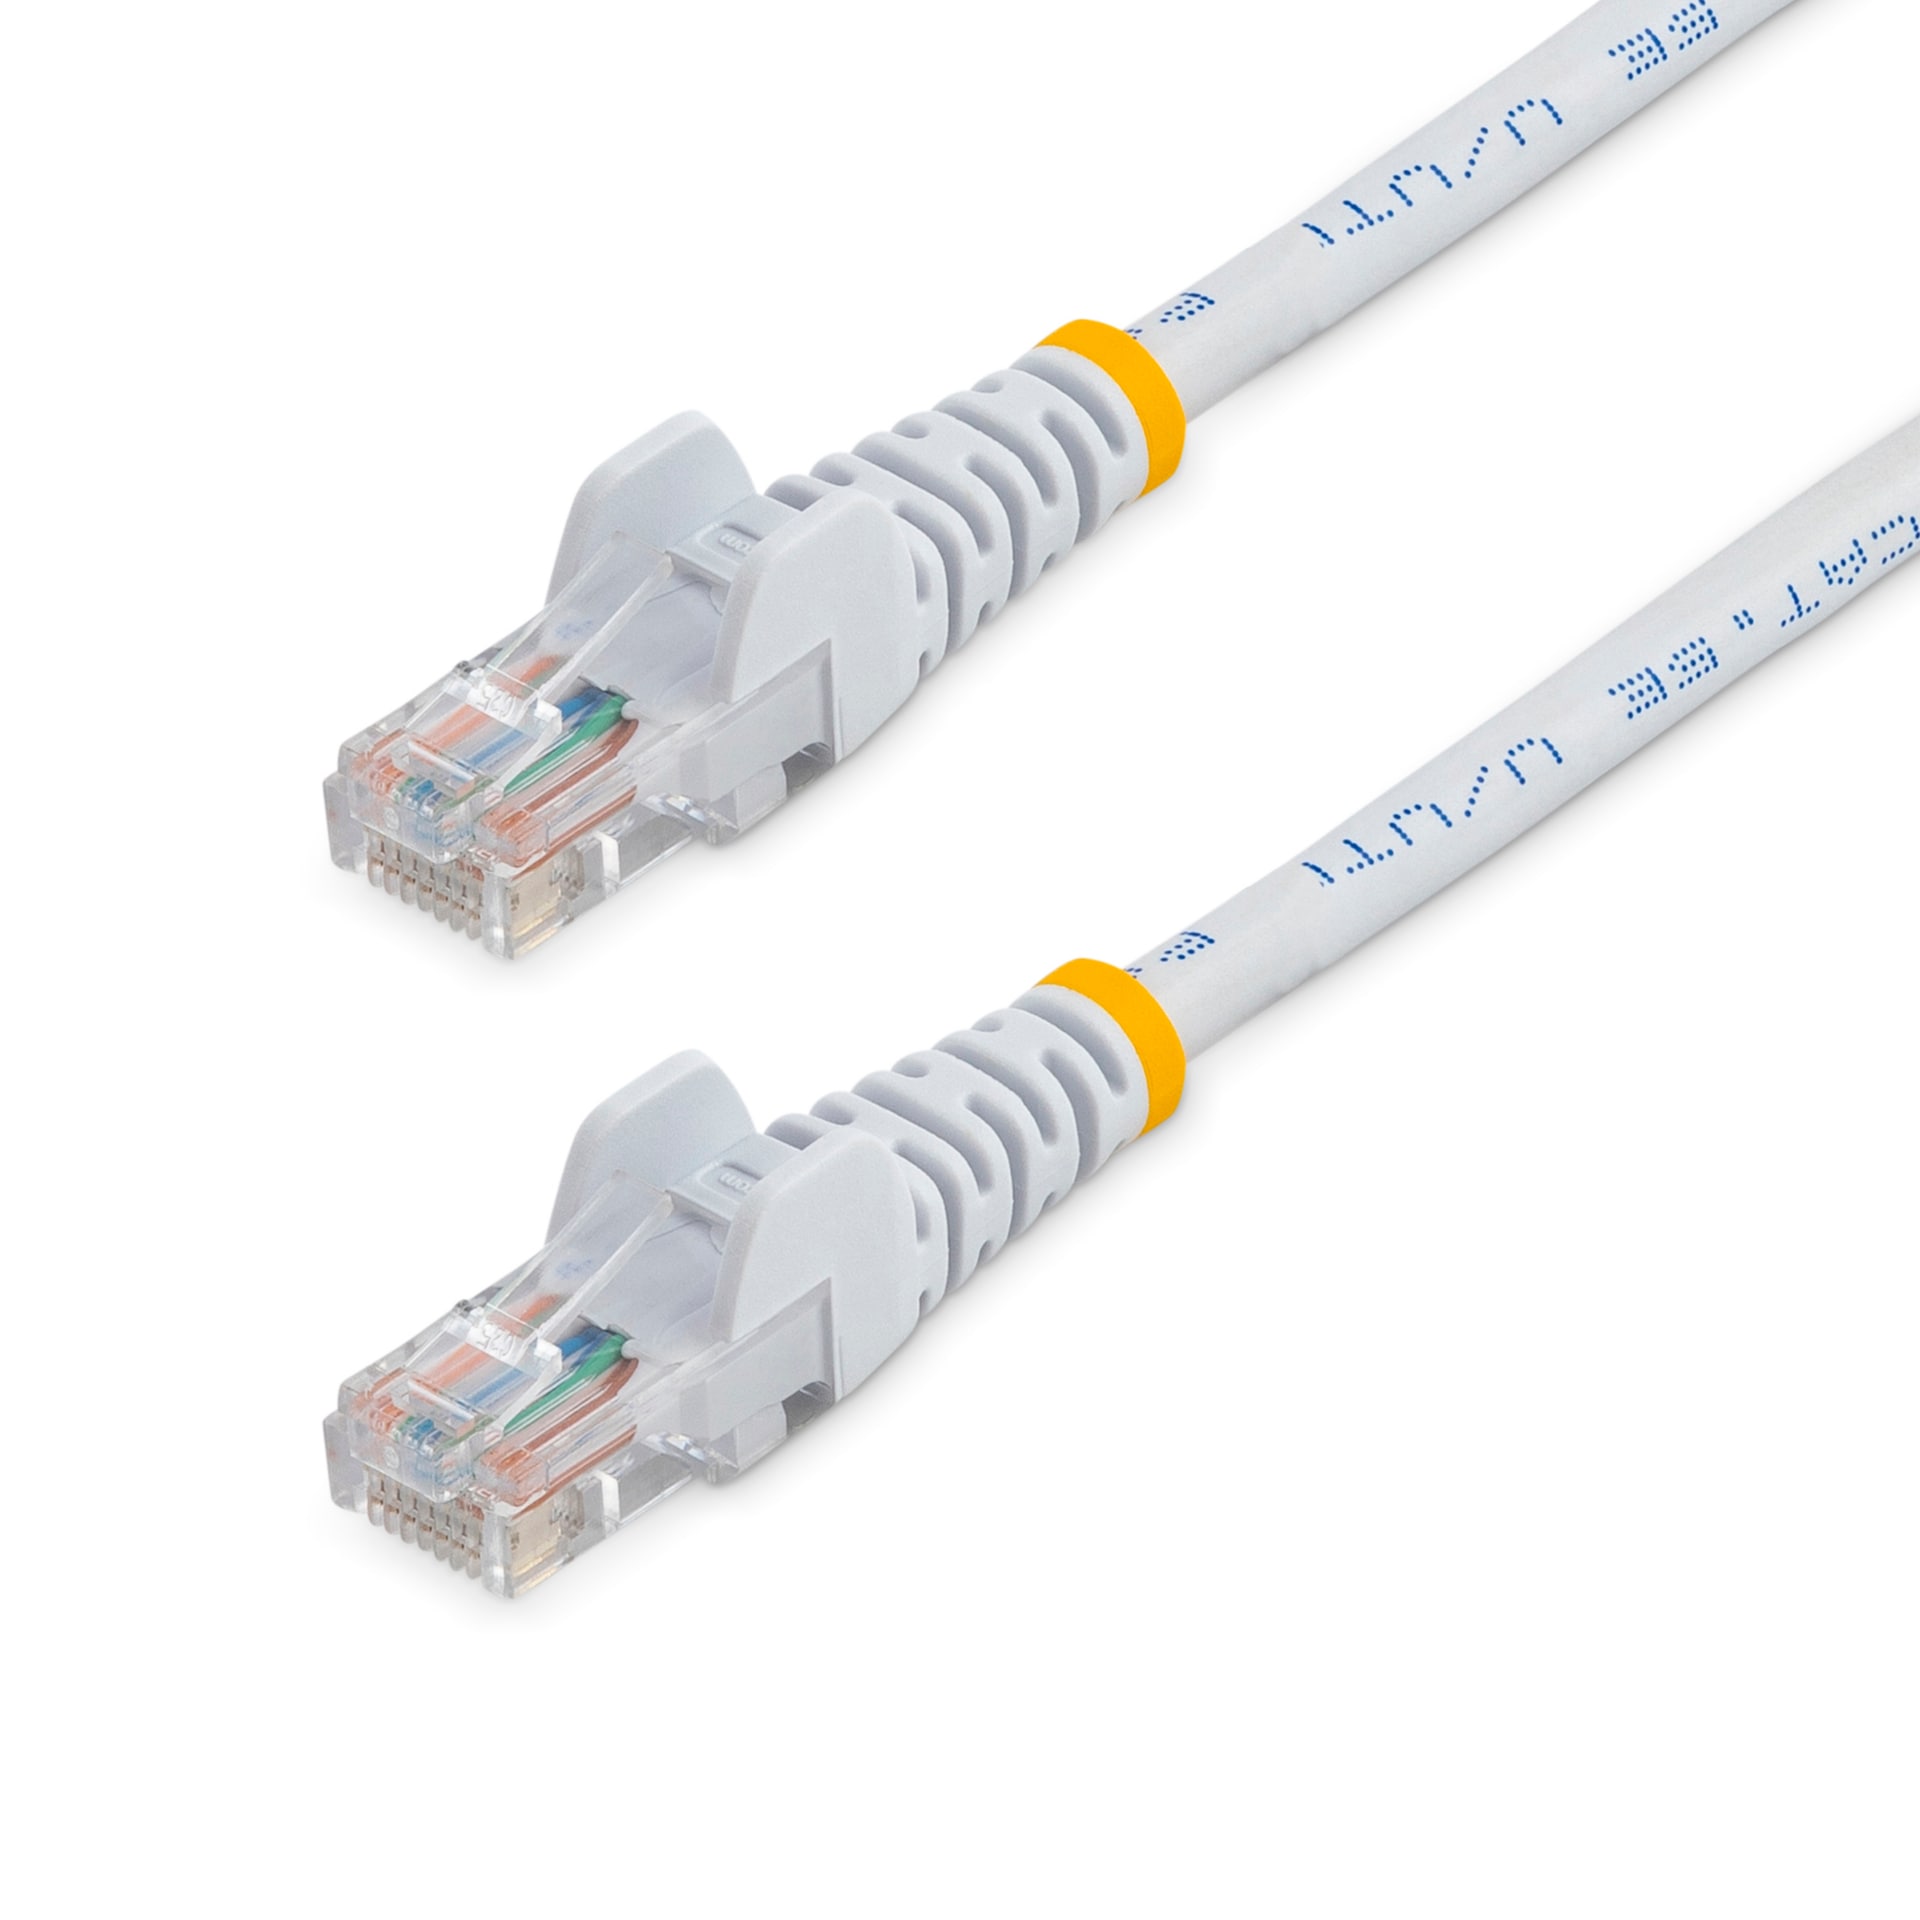 StarTech.com Cat5e Ethernet Cable 15 ft White - Cat 5e Snagless Patch Cable